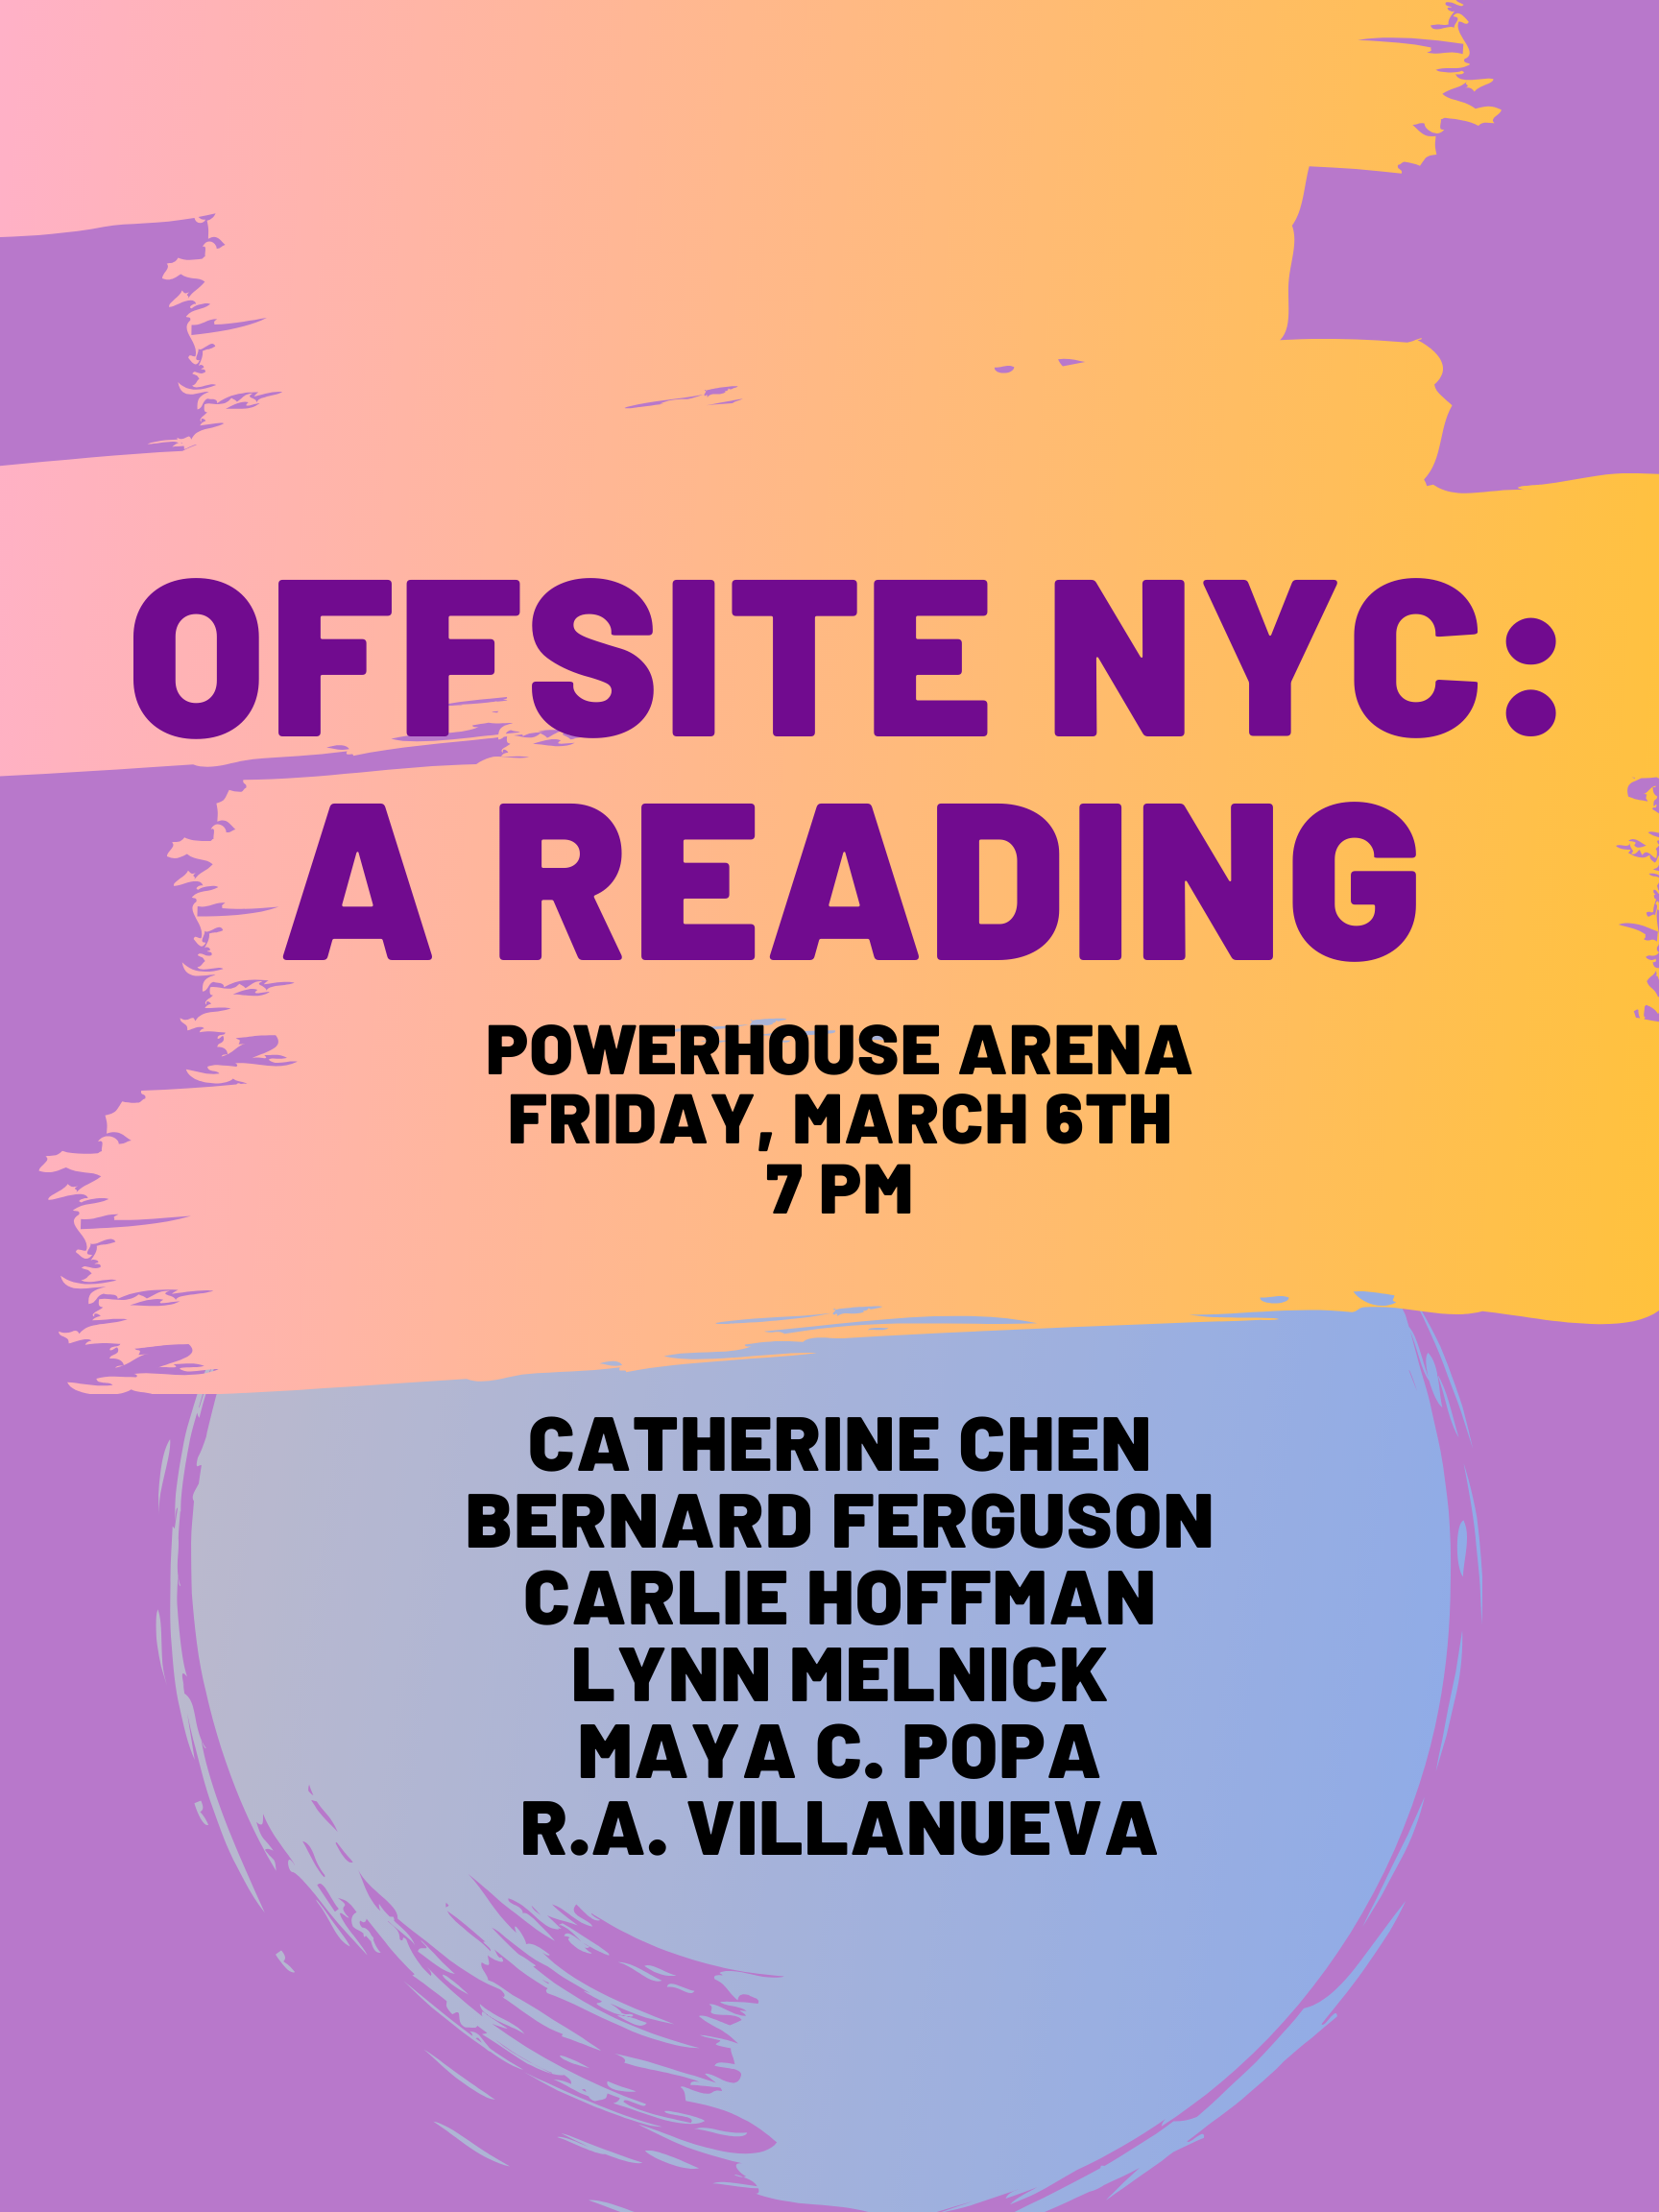 Offsite NYC: A Reading